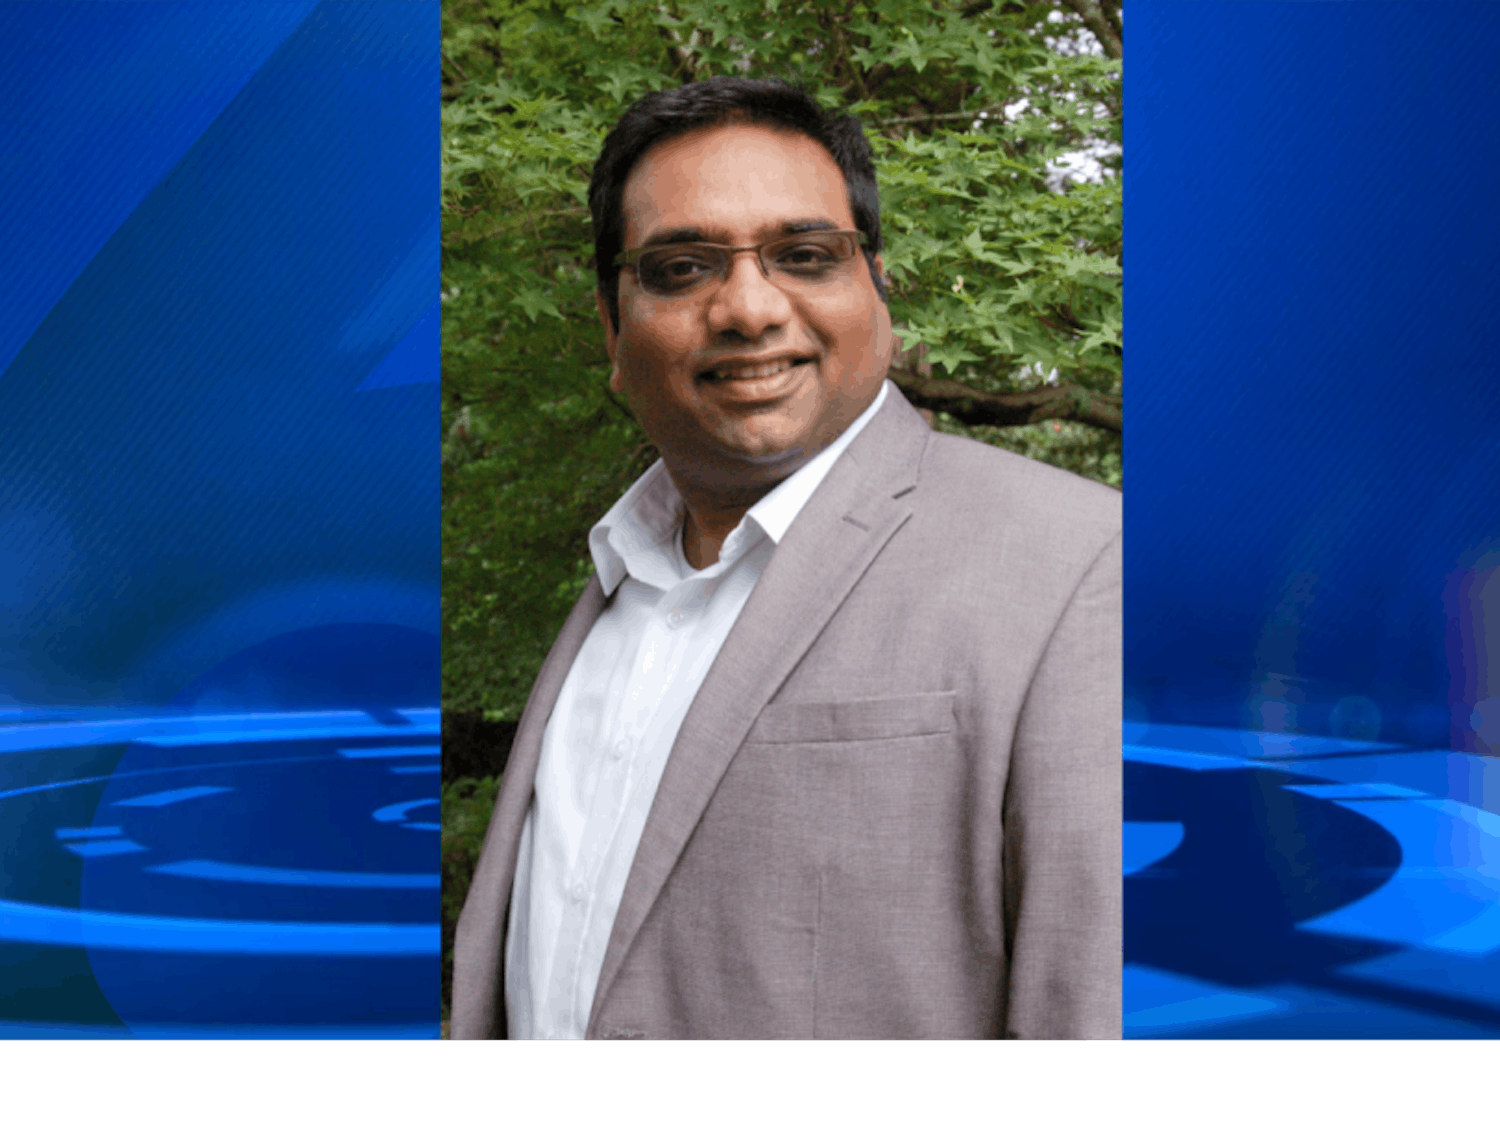 Amit Morey, assistant professor in the College of Agriculture’s Department of Poultry Science